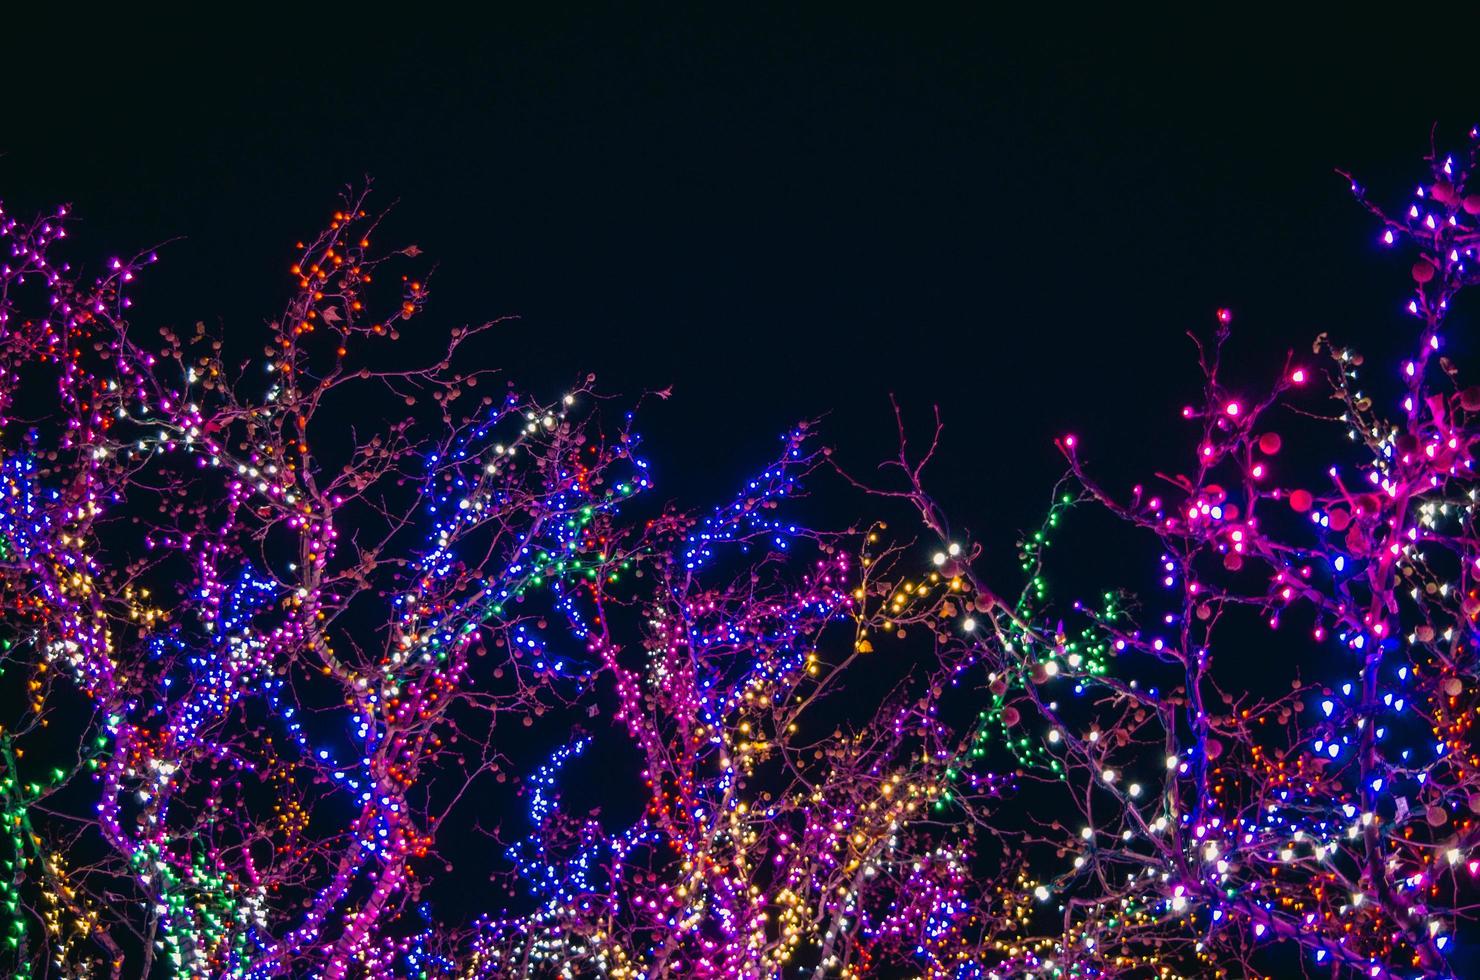 Trees covered in colorful string lights at night photo